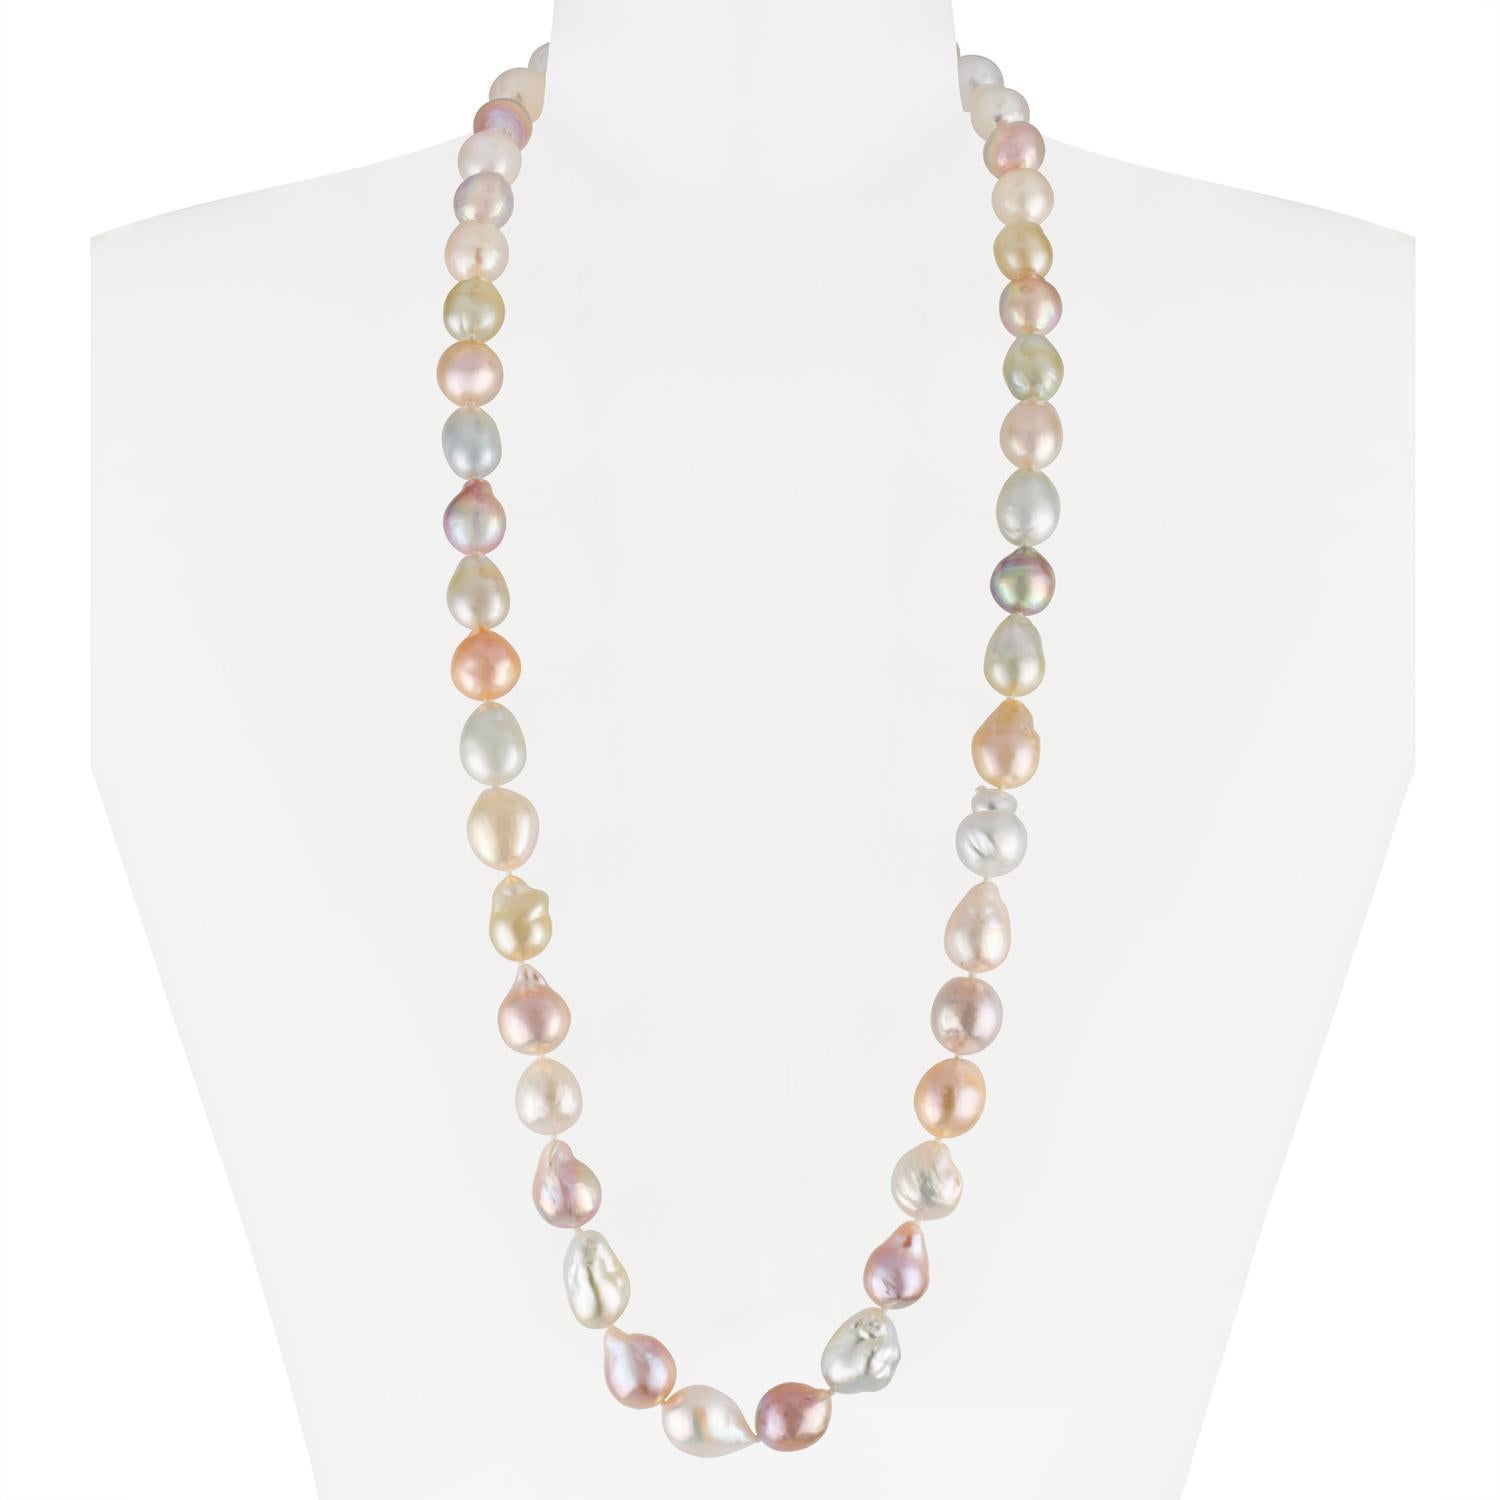 This rope length necklace blends South Sea white, South Sea golden, and multiple hues of Chinese freshwater natural-color baroque cultured pearls. The double length rope necklace features pearls measuring 13x15.5mm and is 36 inches in length. This